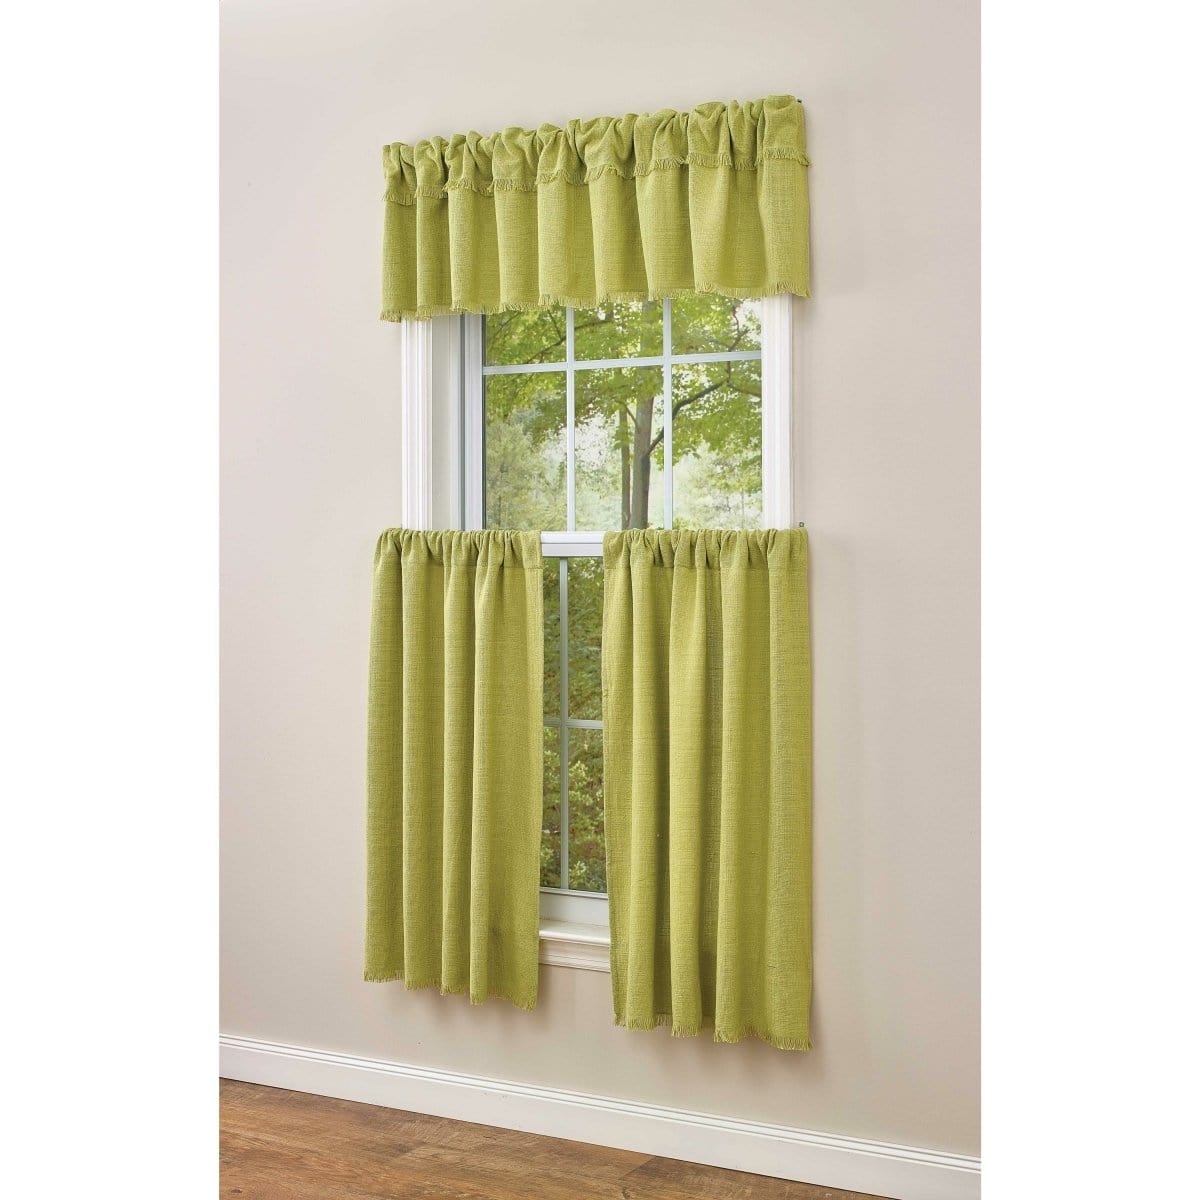 Crawford In Aloe Valance Unlined-Park Designs-The Village Merchant